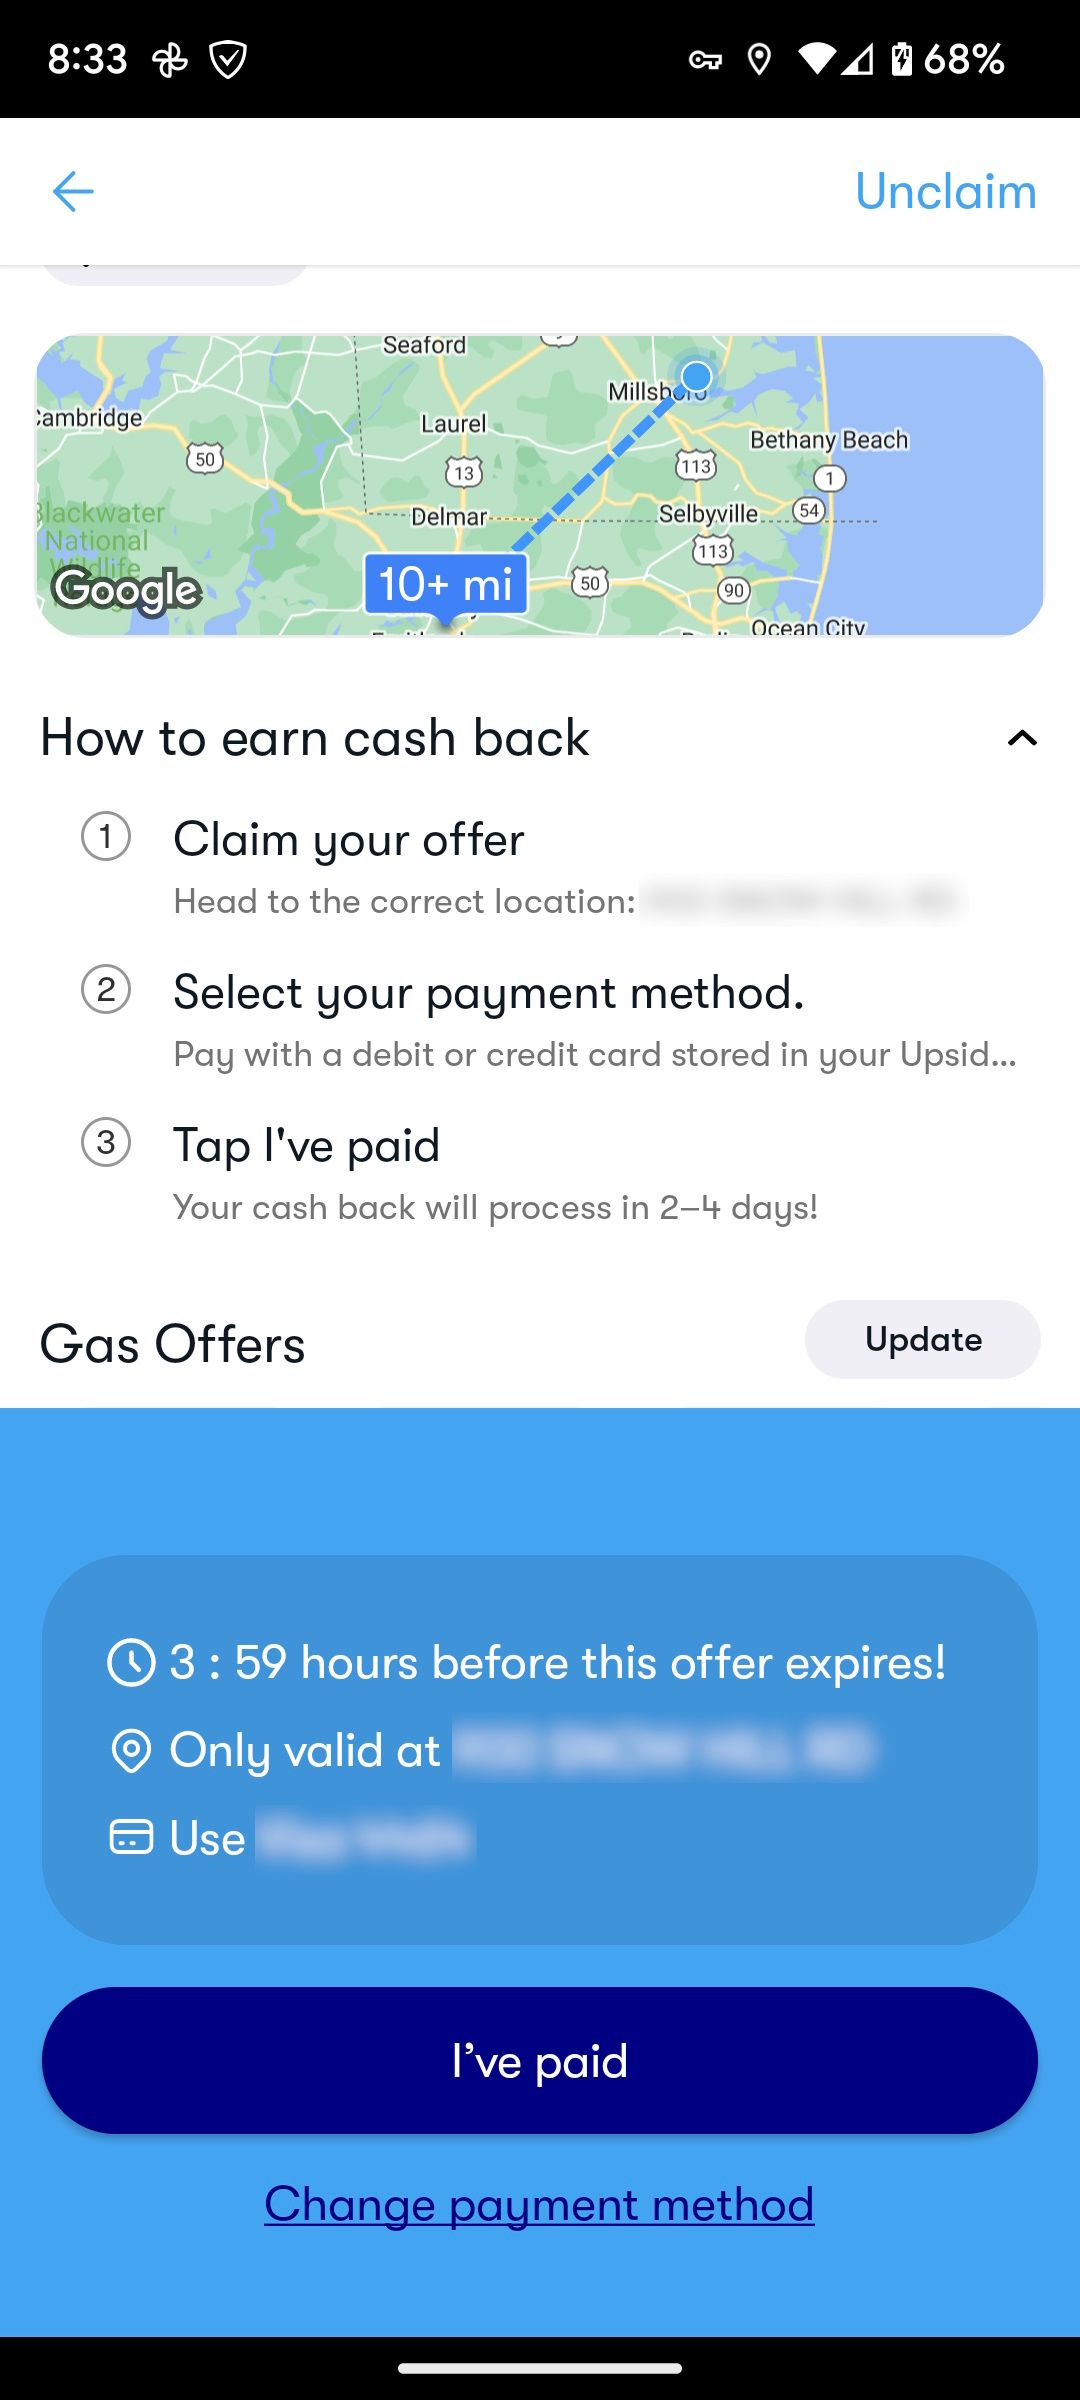 A screen in Upside where users can confirm they've paid